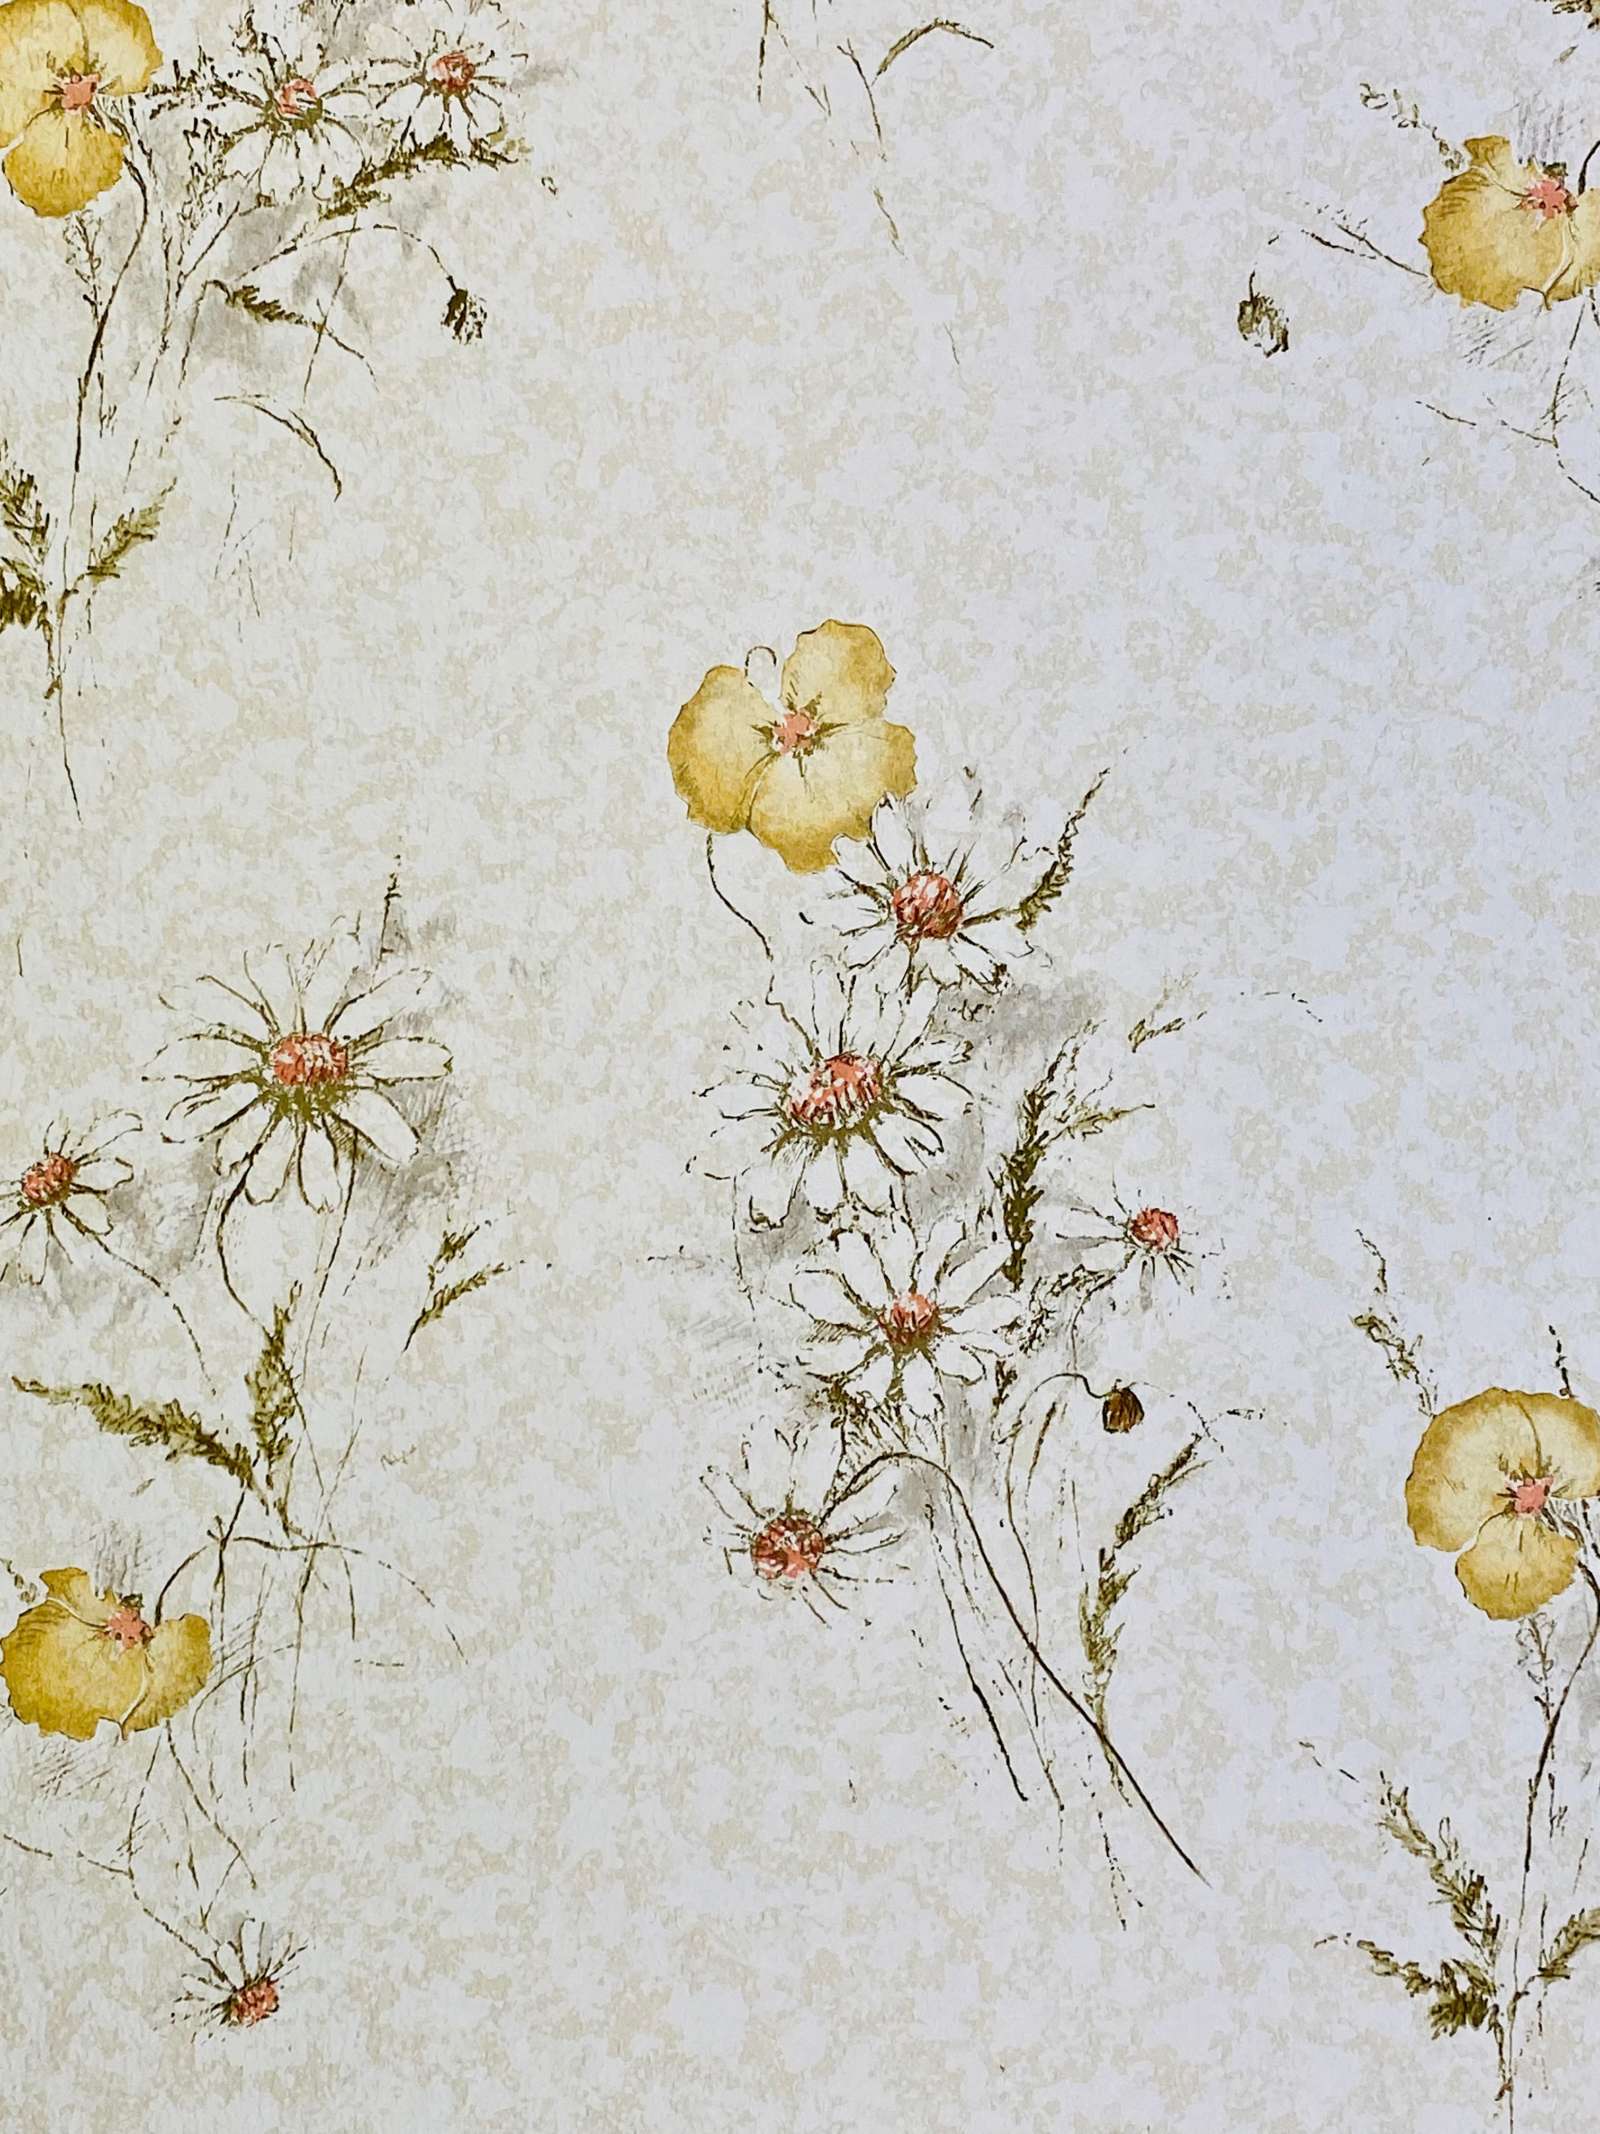 Vintage wallpaper with a floral pattern - 60s